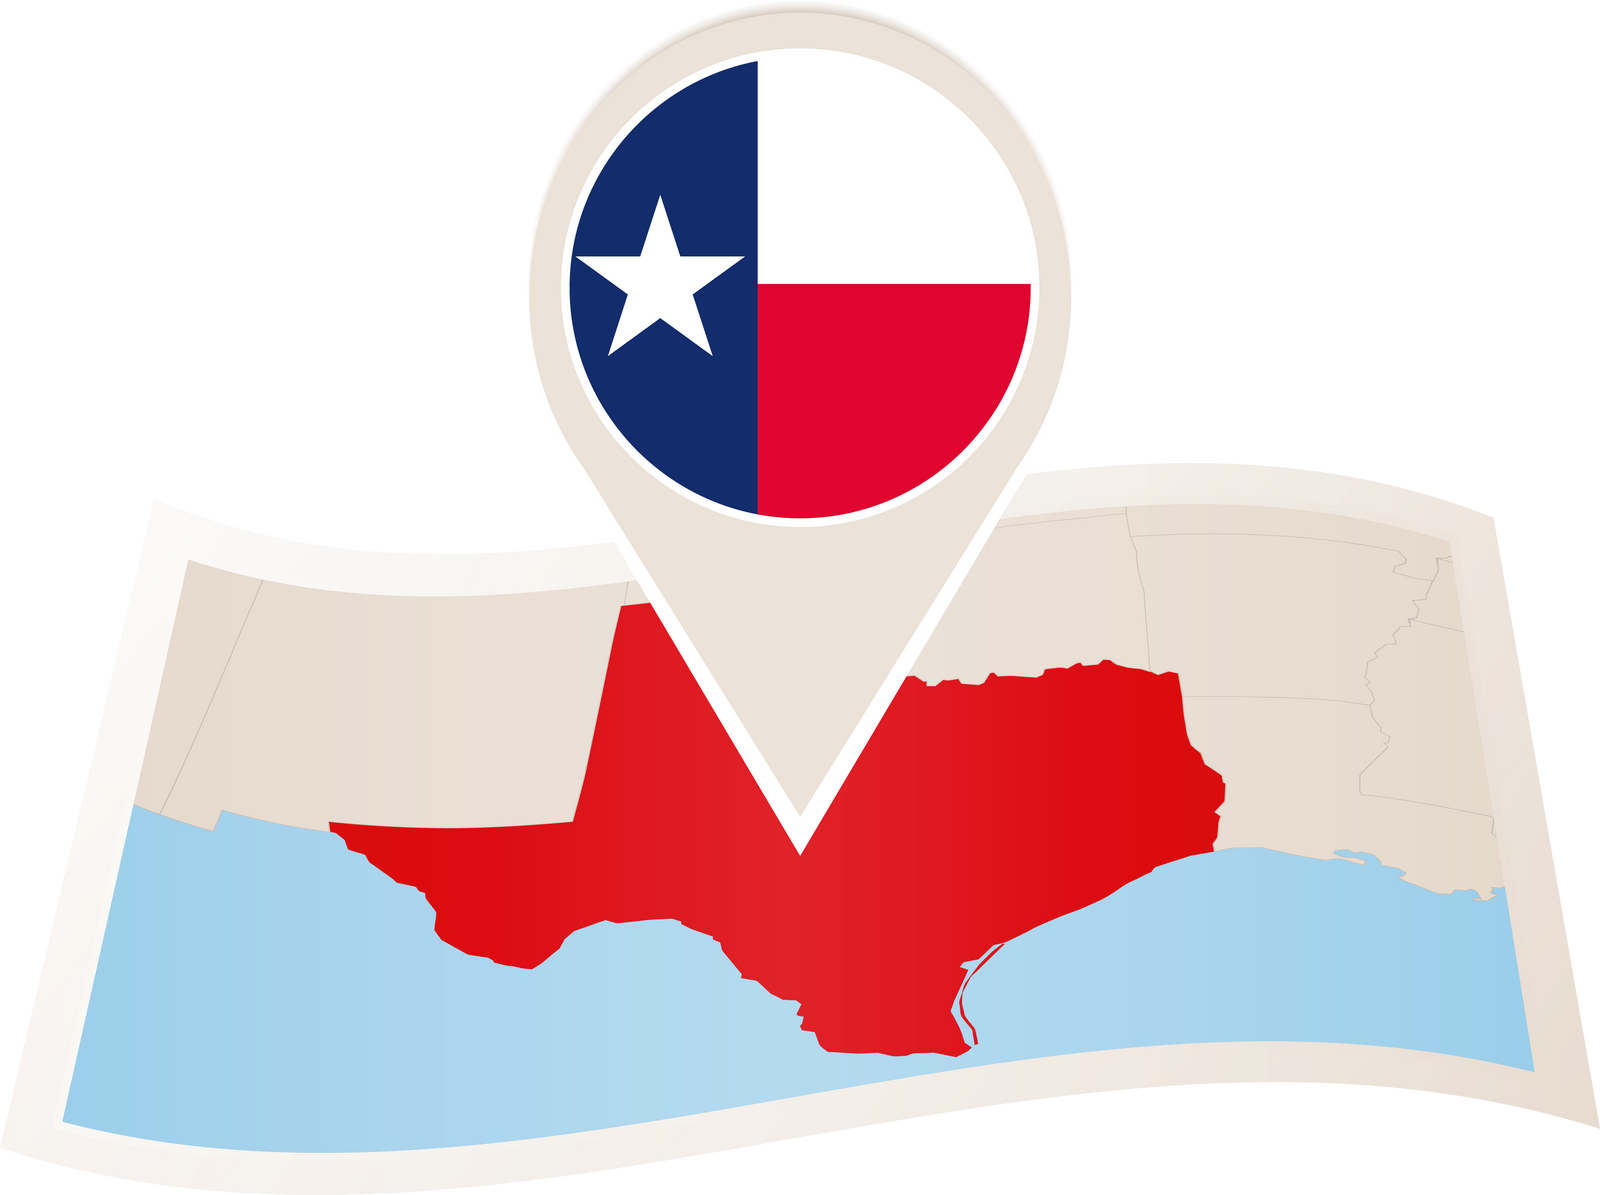 Folded paper map of Texas  U.S. State with flag pin of Texas.